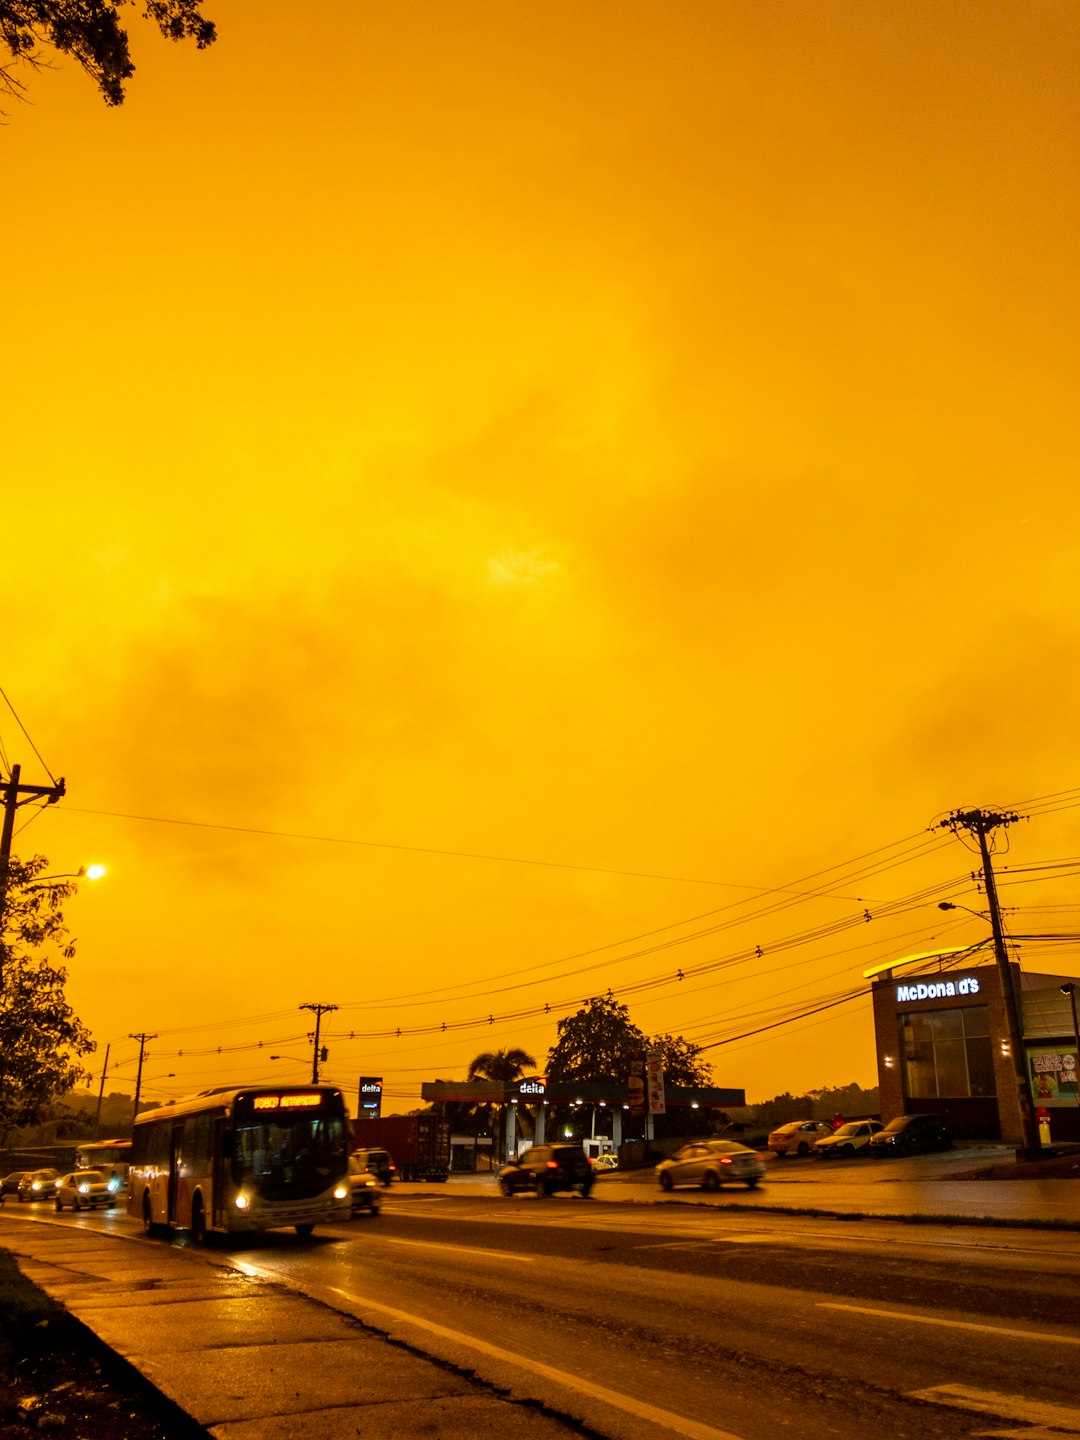 cars and buses traveling on highway under yellow sunset sky